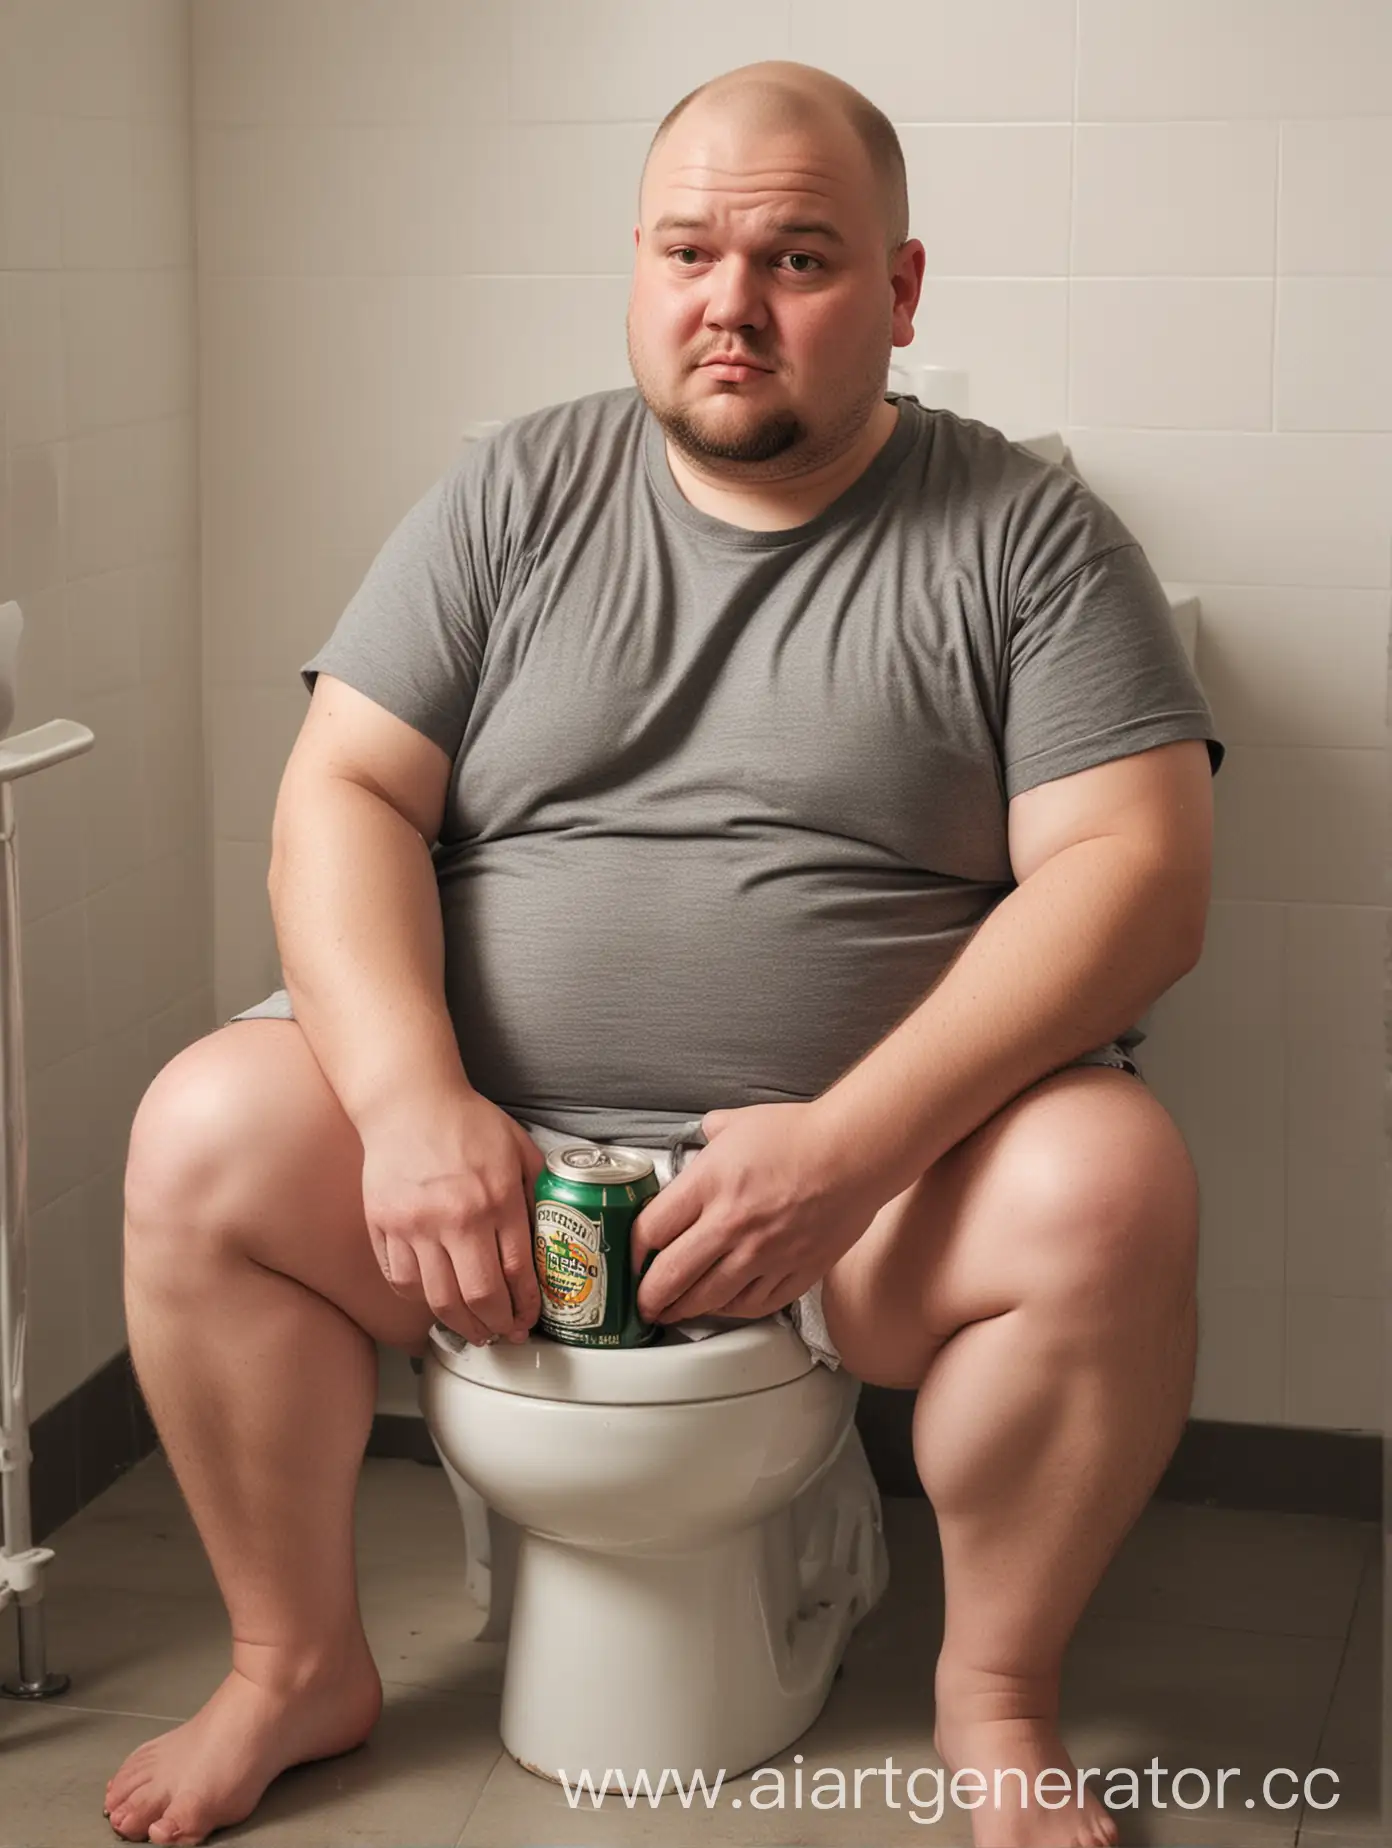 Relaxed-Man-on-Toilet-with-Beer-Bottle